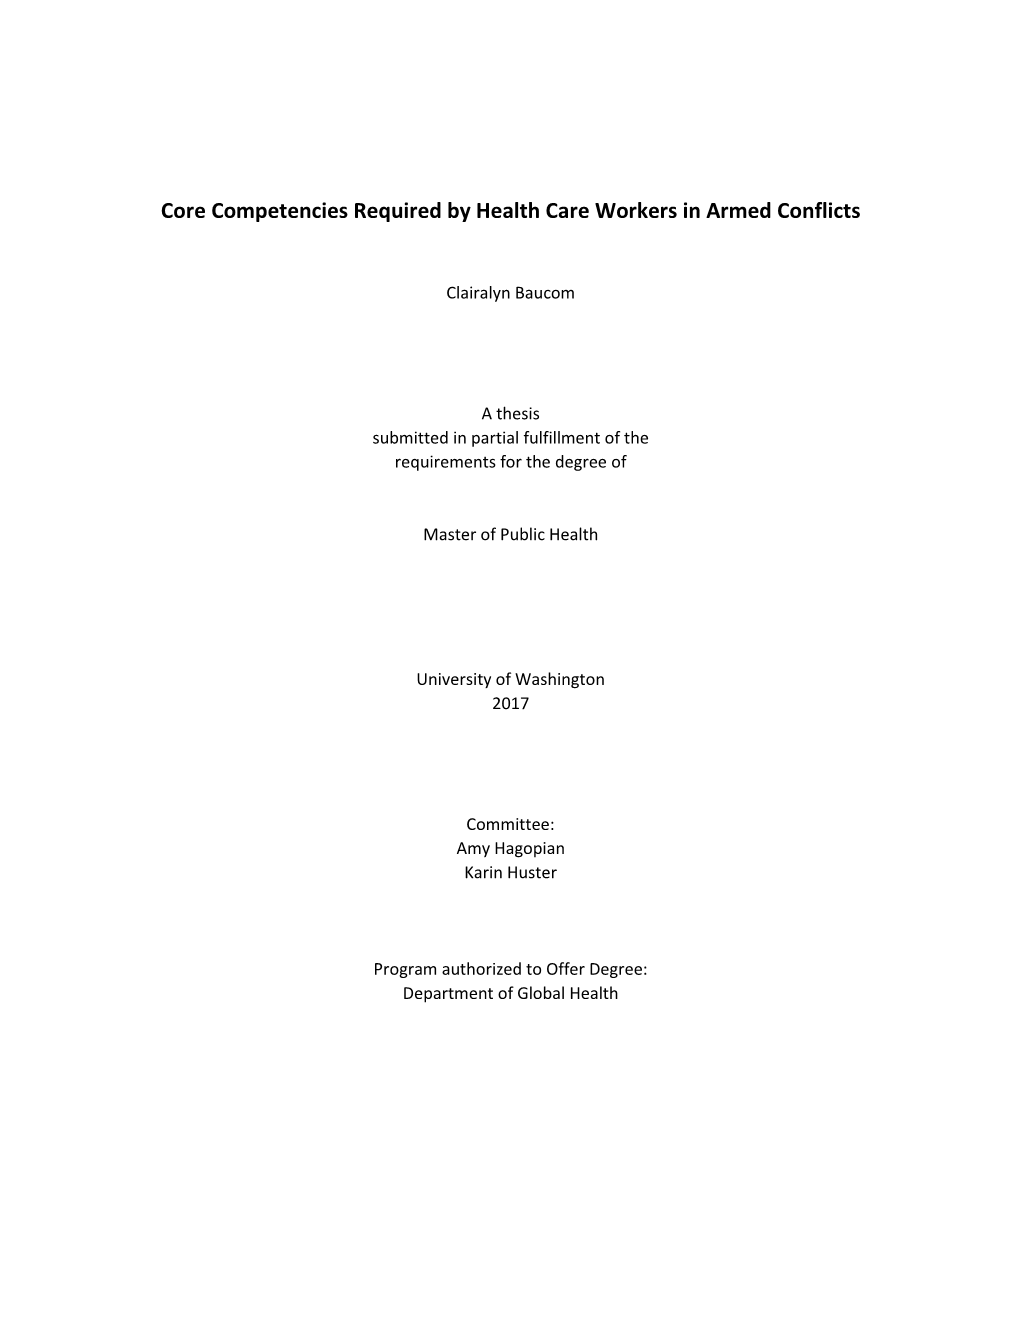 Core Competencies Required by Health Care Workers in Armed Conflicts